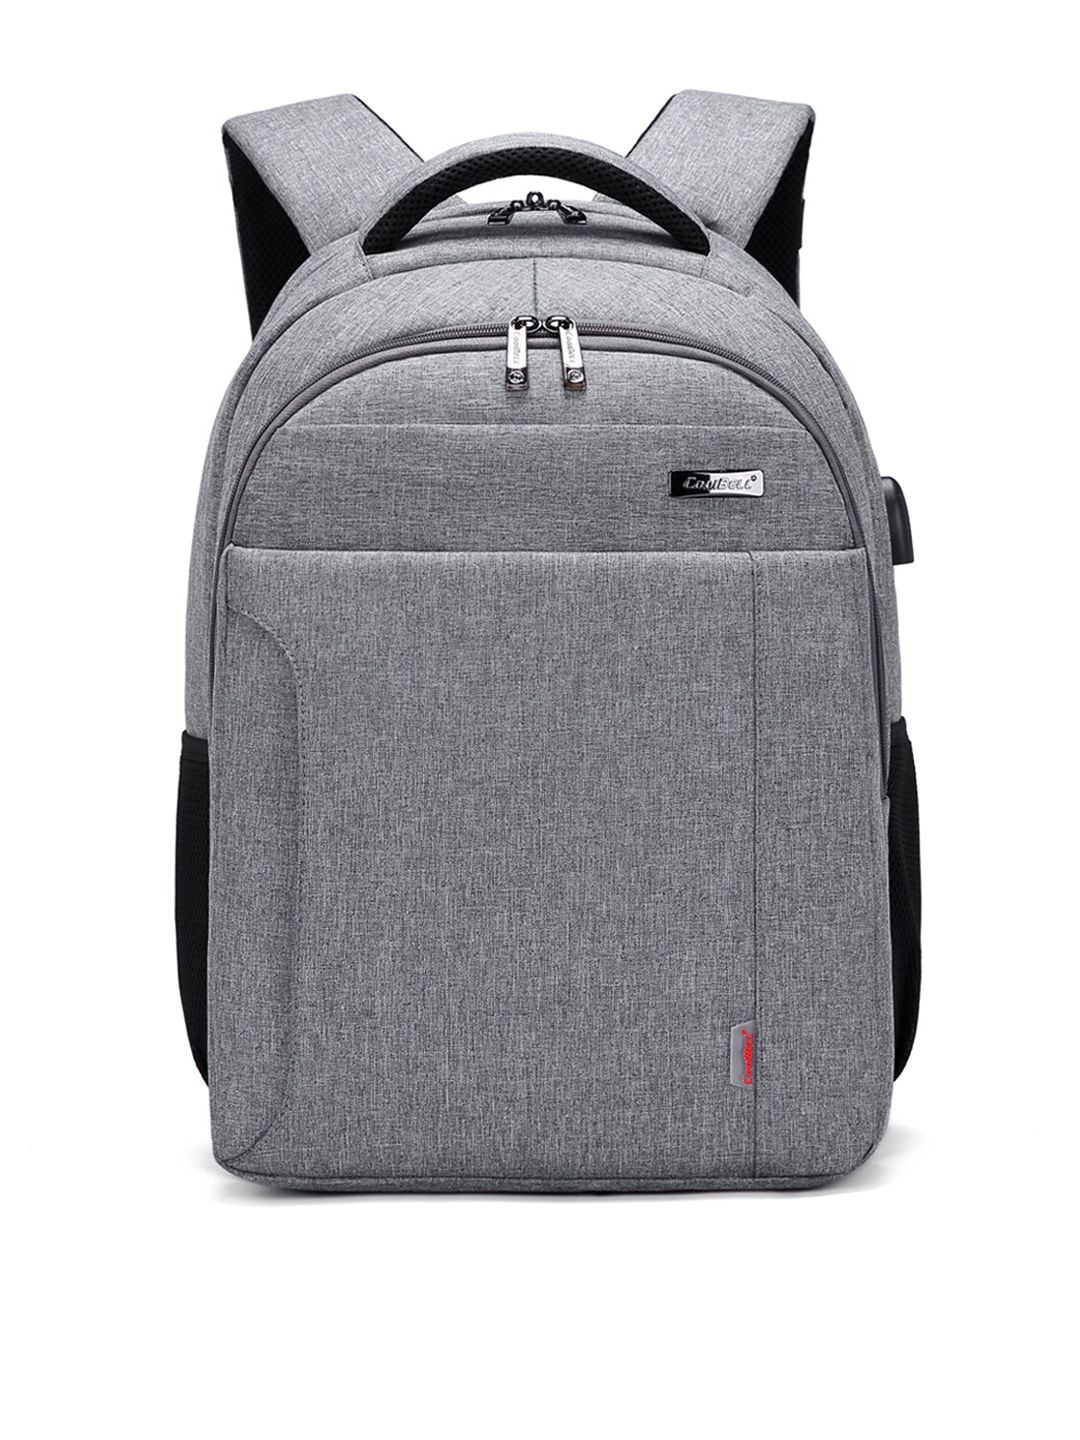 CoolBELL Unisex Grey & Black Backpacks with USB Charging Port Price in India